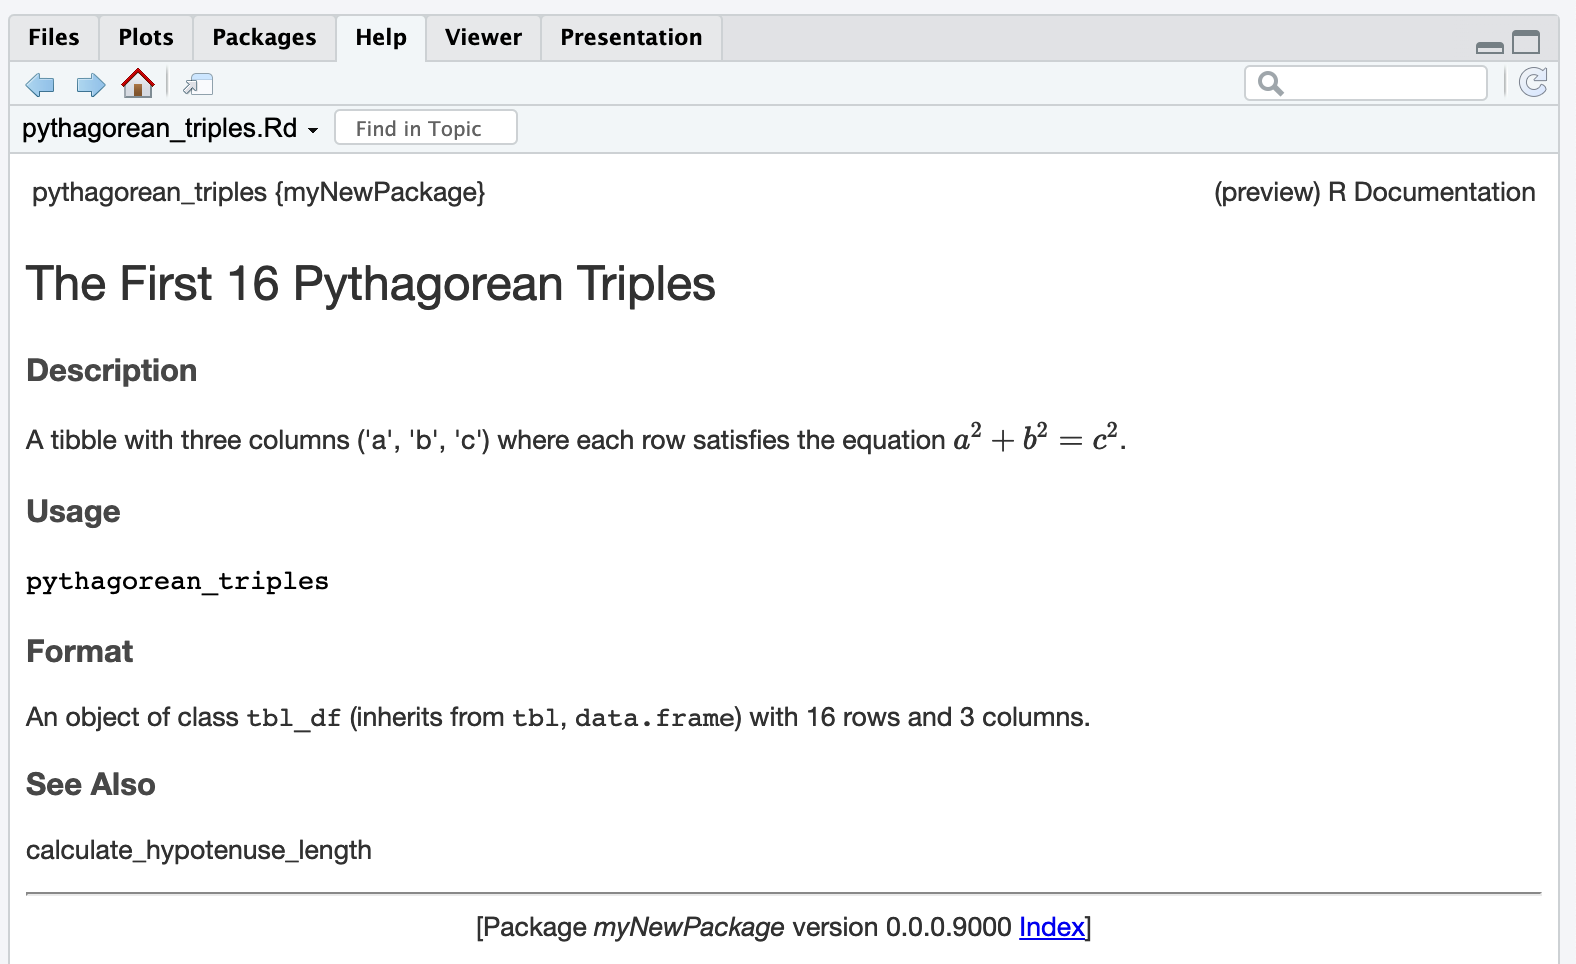 the documentation that goes with the pythagorean_triples object